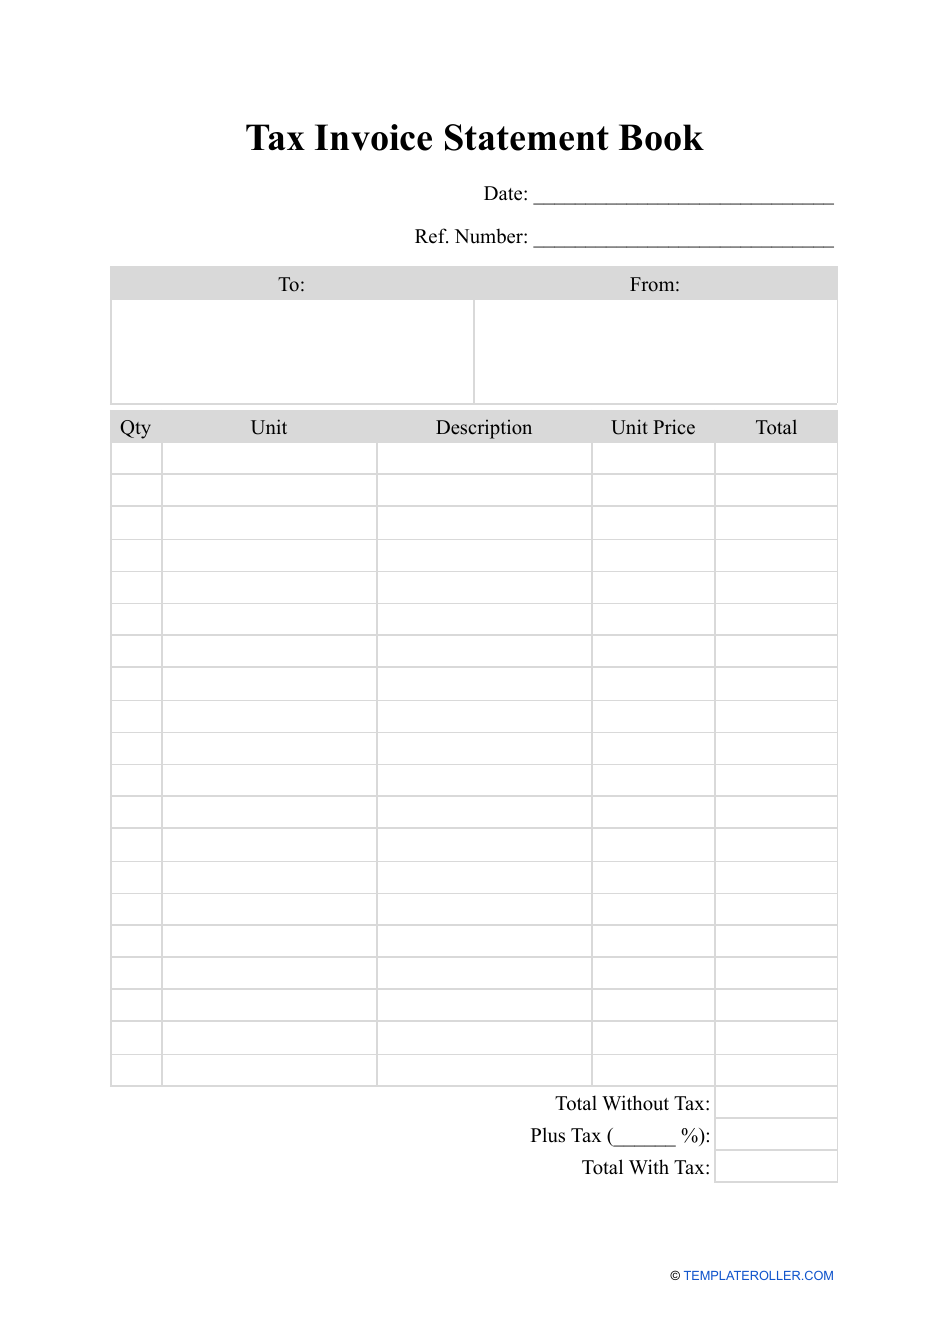 Tax Invoice Statement Book Template, Page 1